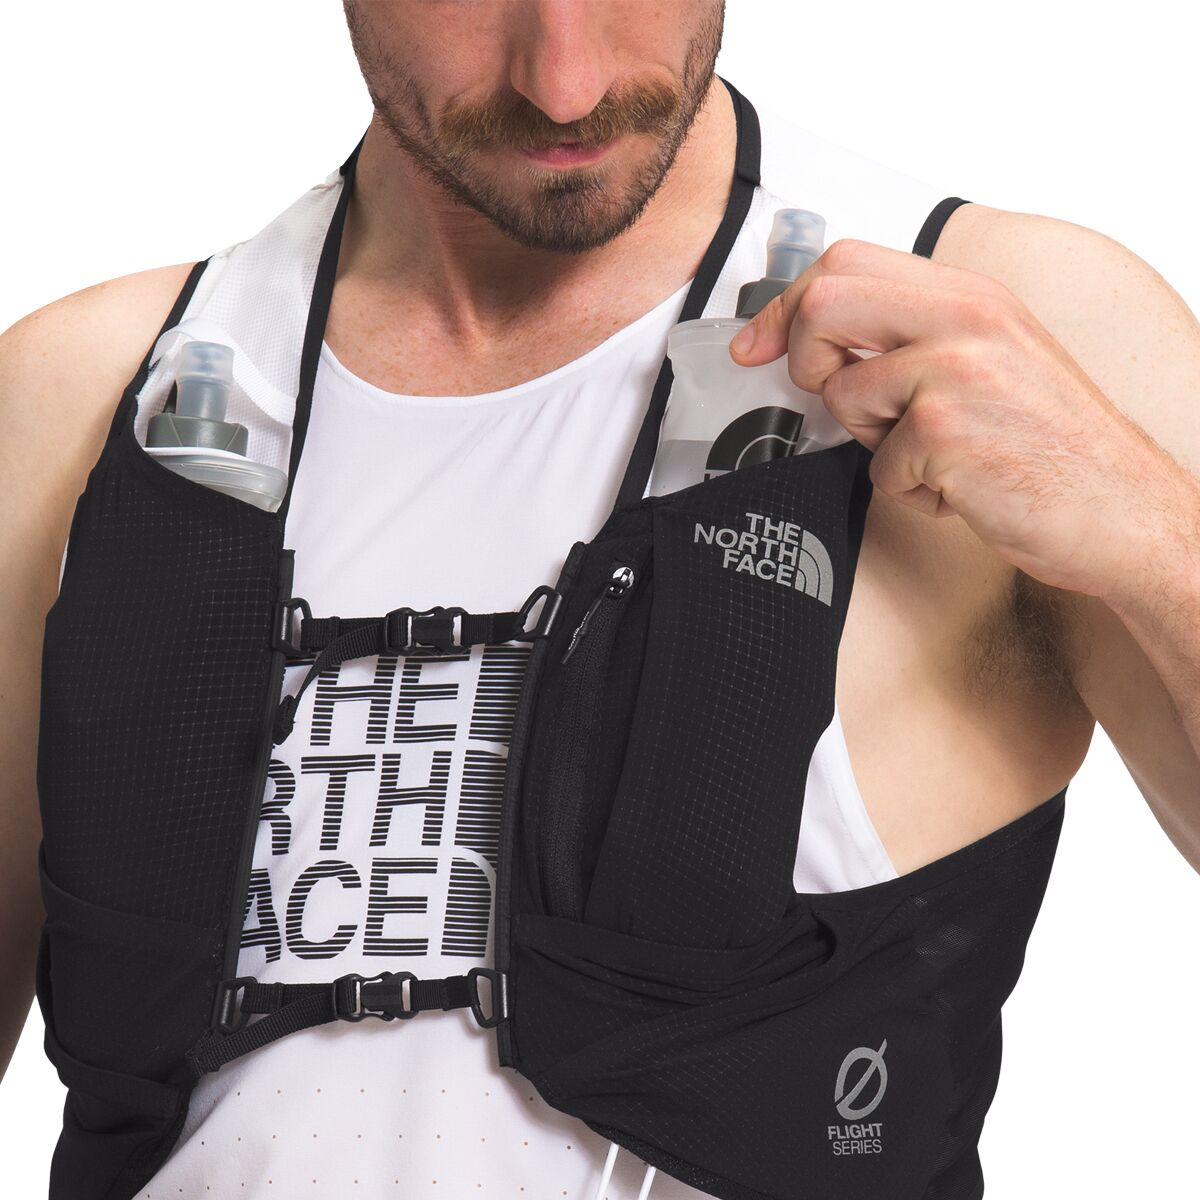 The North Face Flight Race Day 8L Vest - Hike & Camp